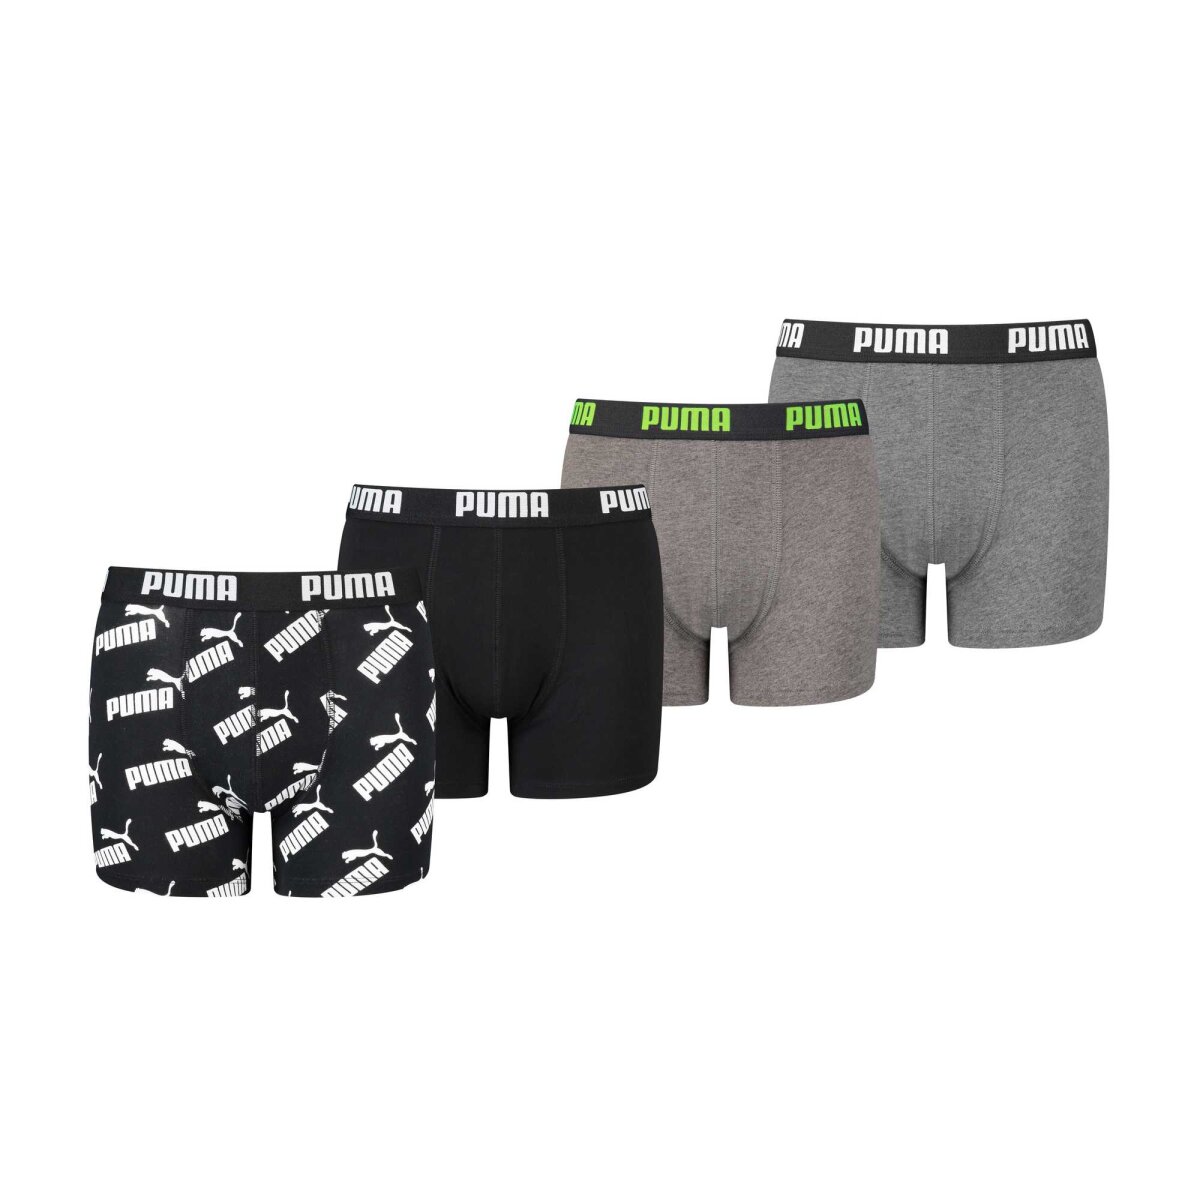 PUMA boxer shorts for boys - pack of 4, 29,90 €